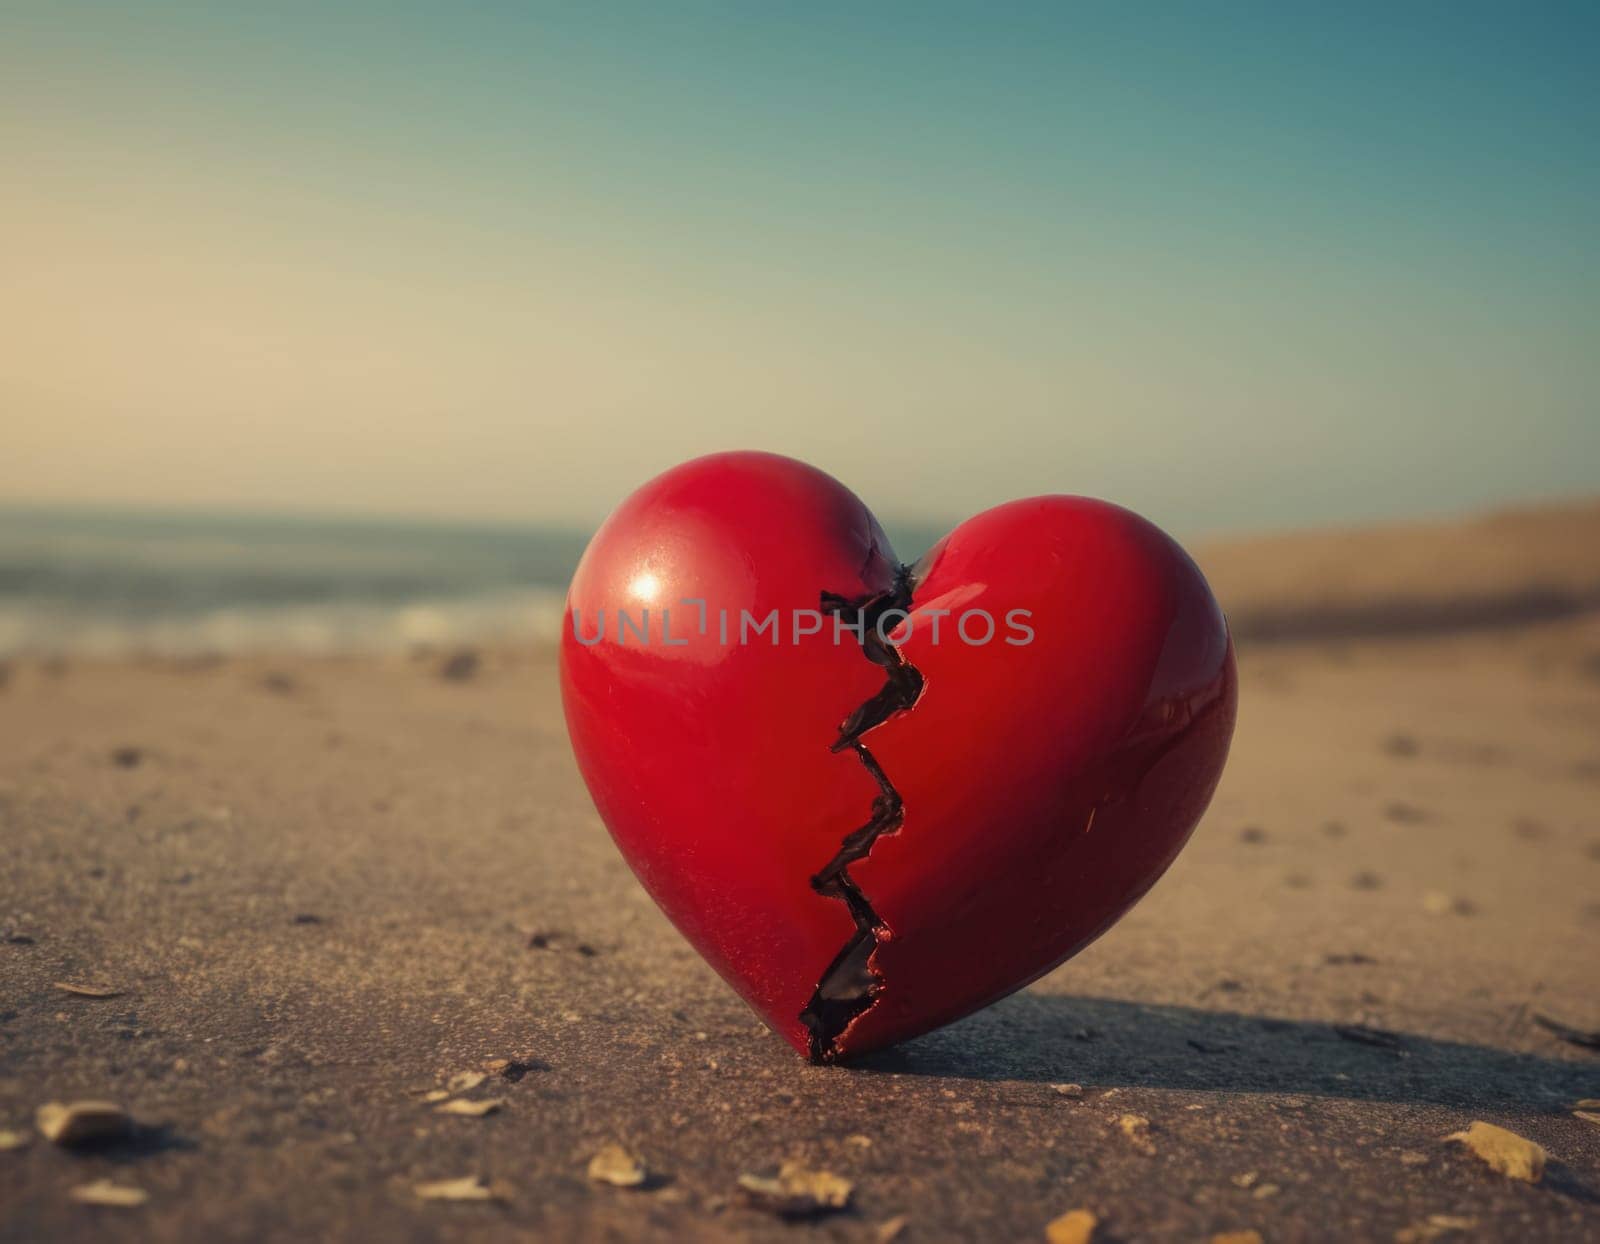 A vivid red heart split in two lies on a sandy beach with the calm sea in the background. The image captures the poignant moment of love lost and the inevitable journey to healing amidst nature s serene beauty